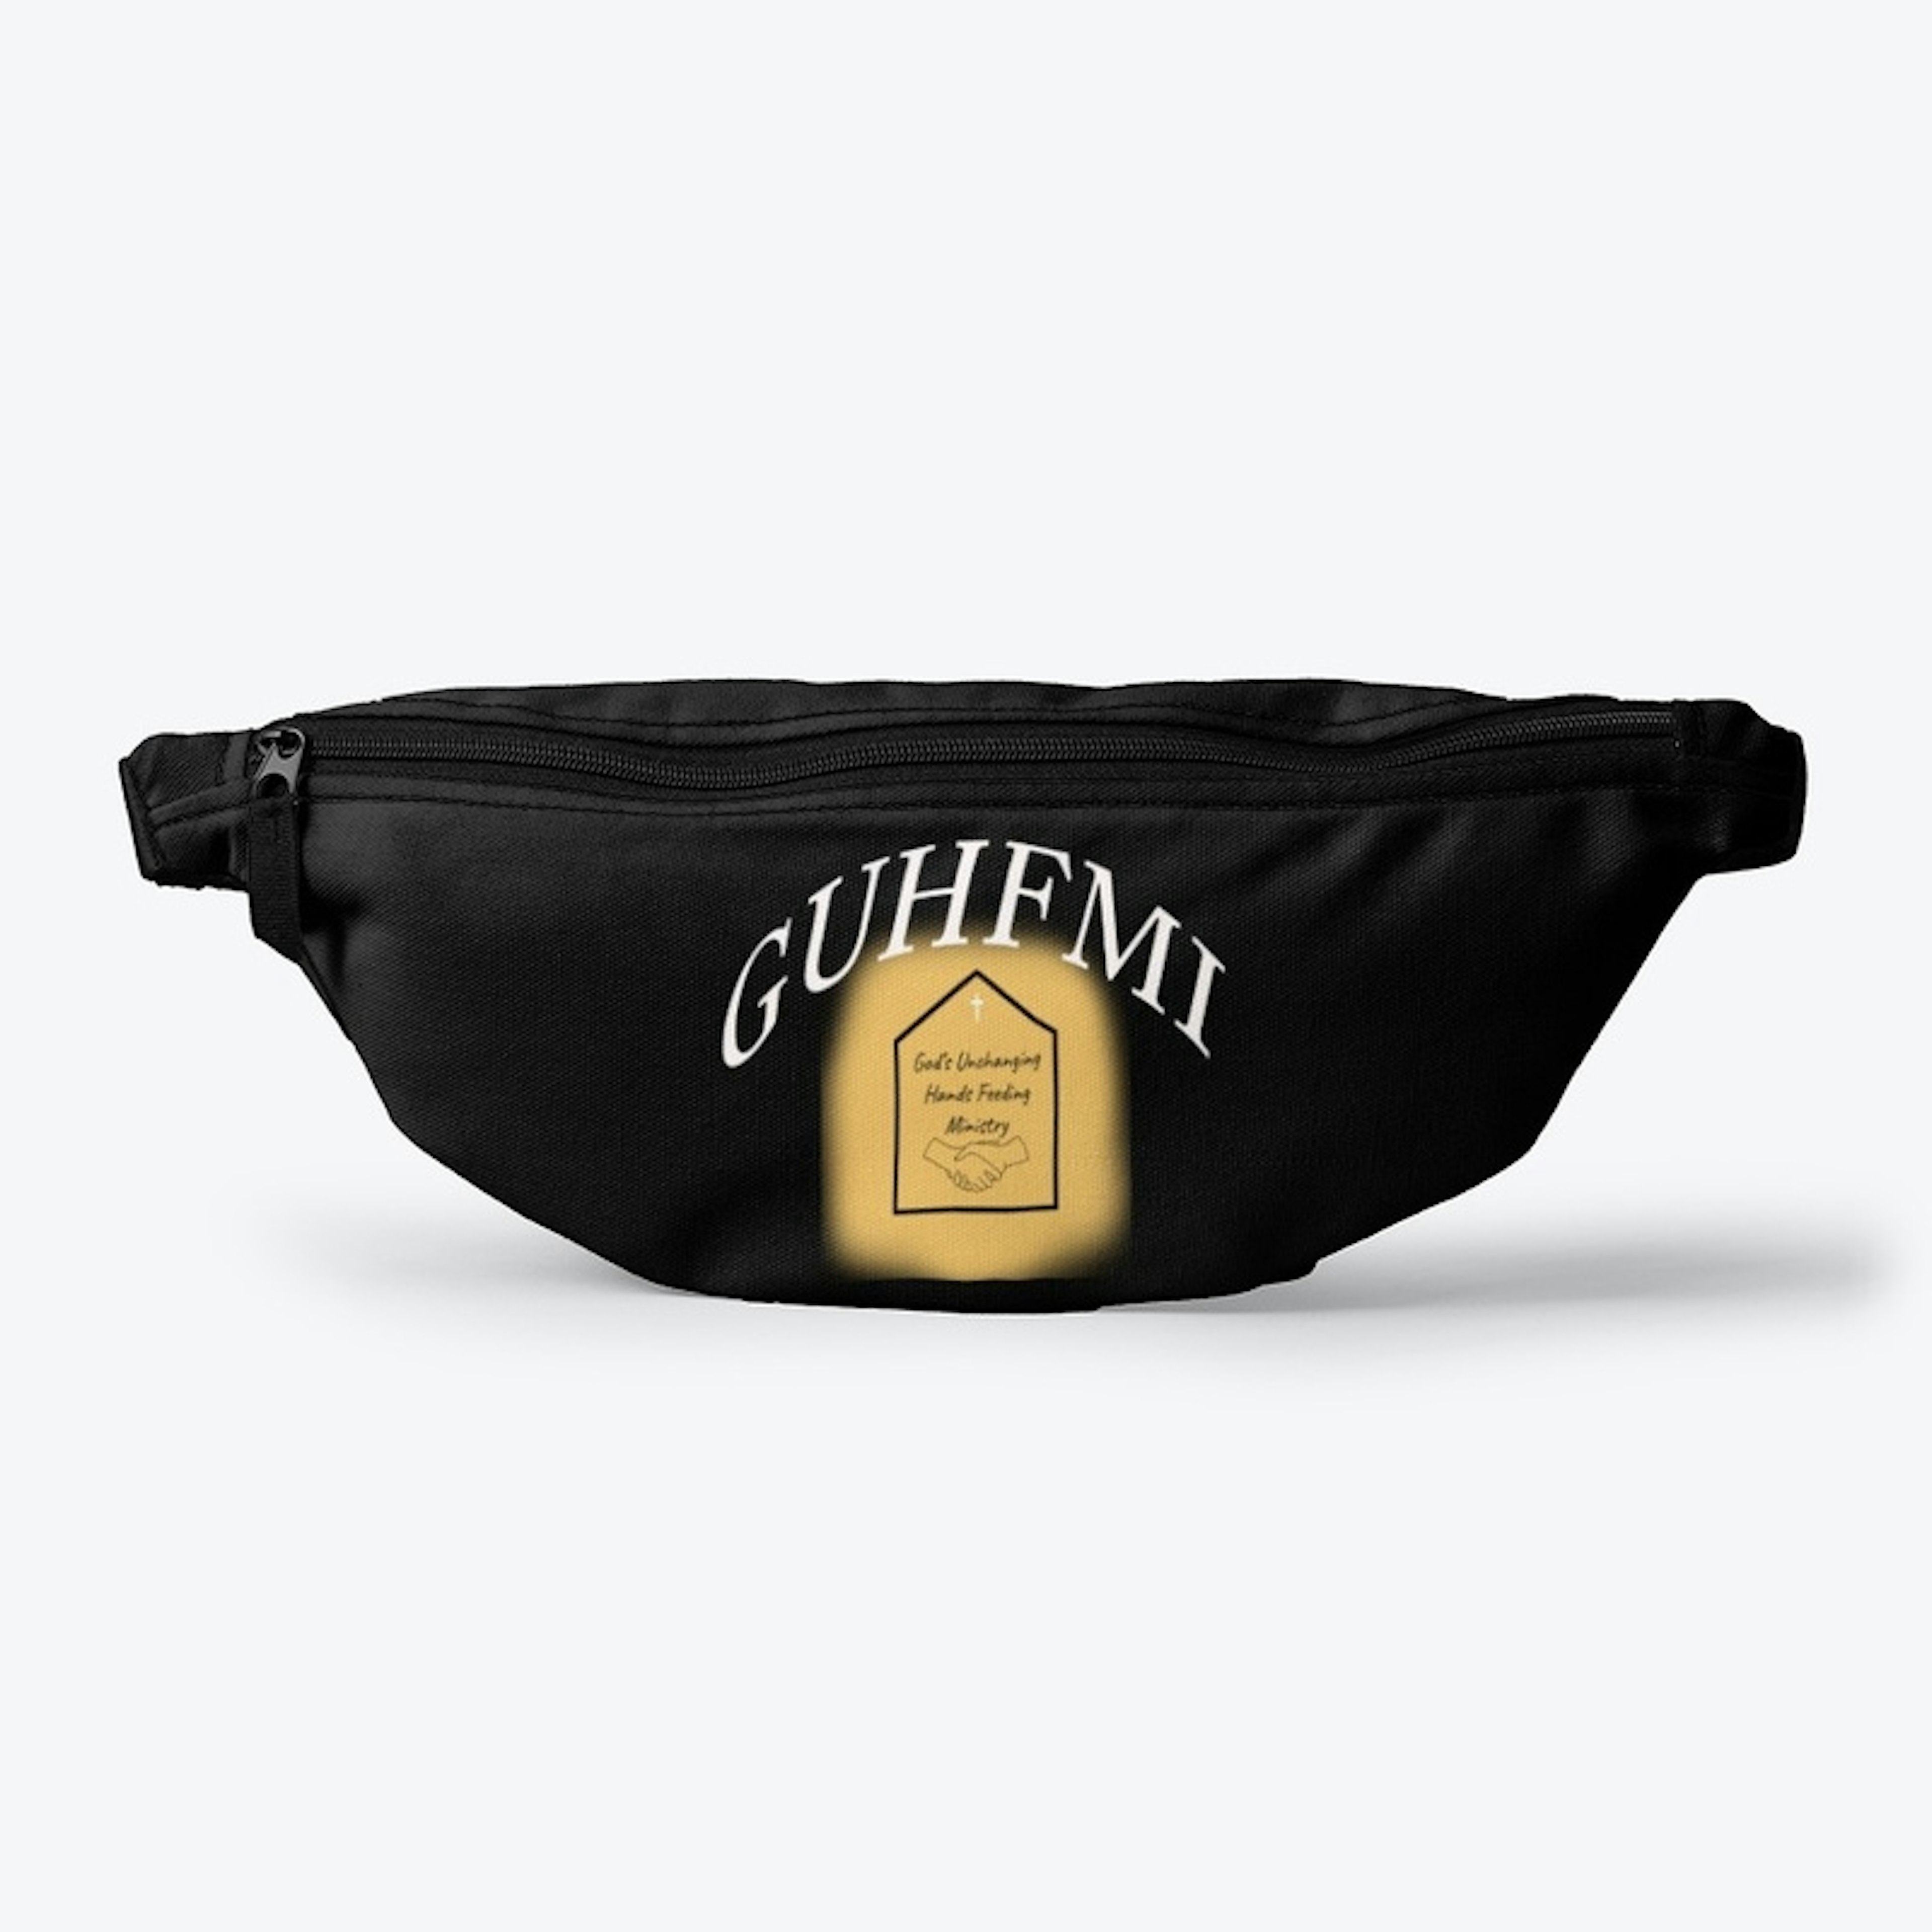 GUHFMI Black and Gold Collection